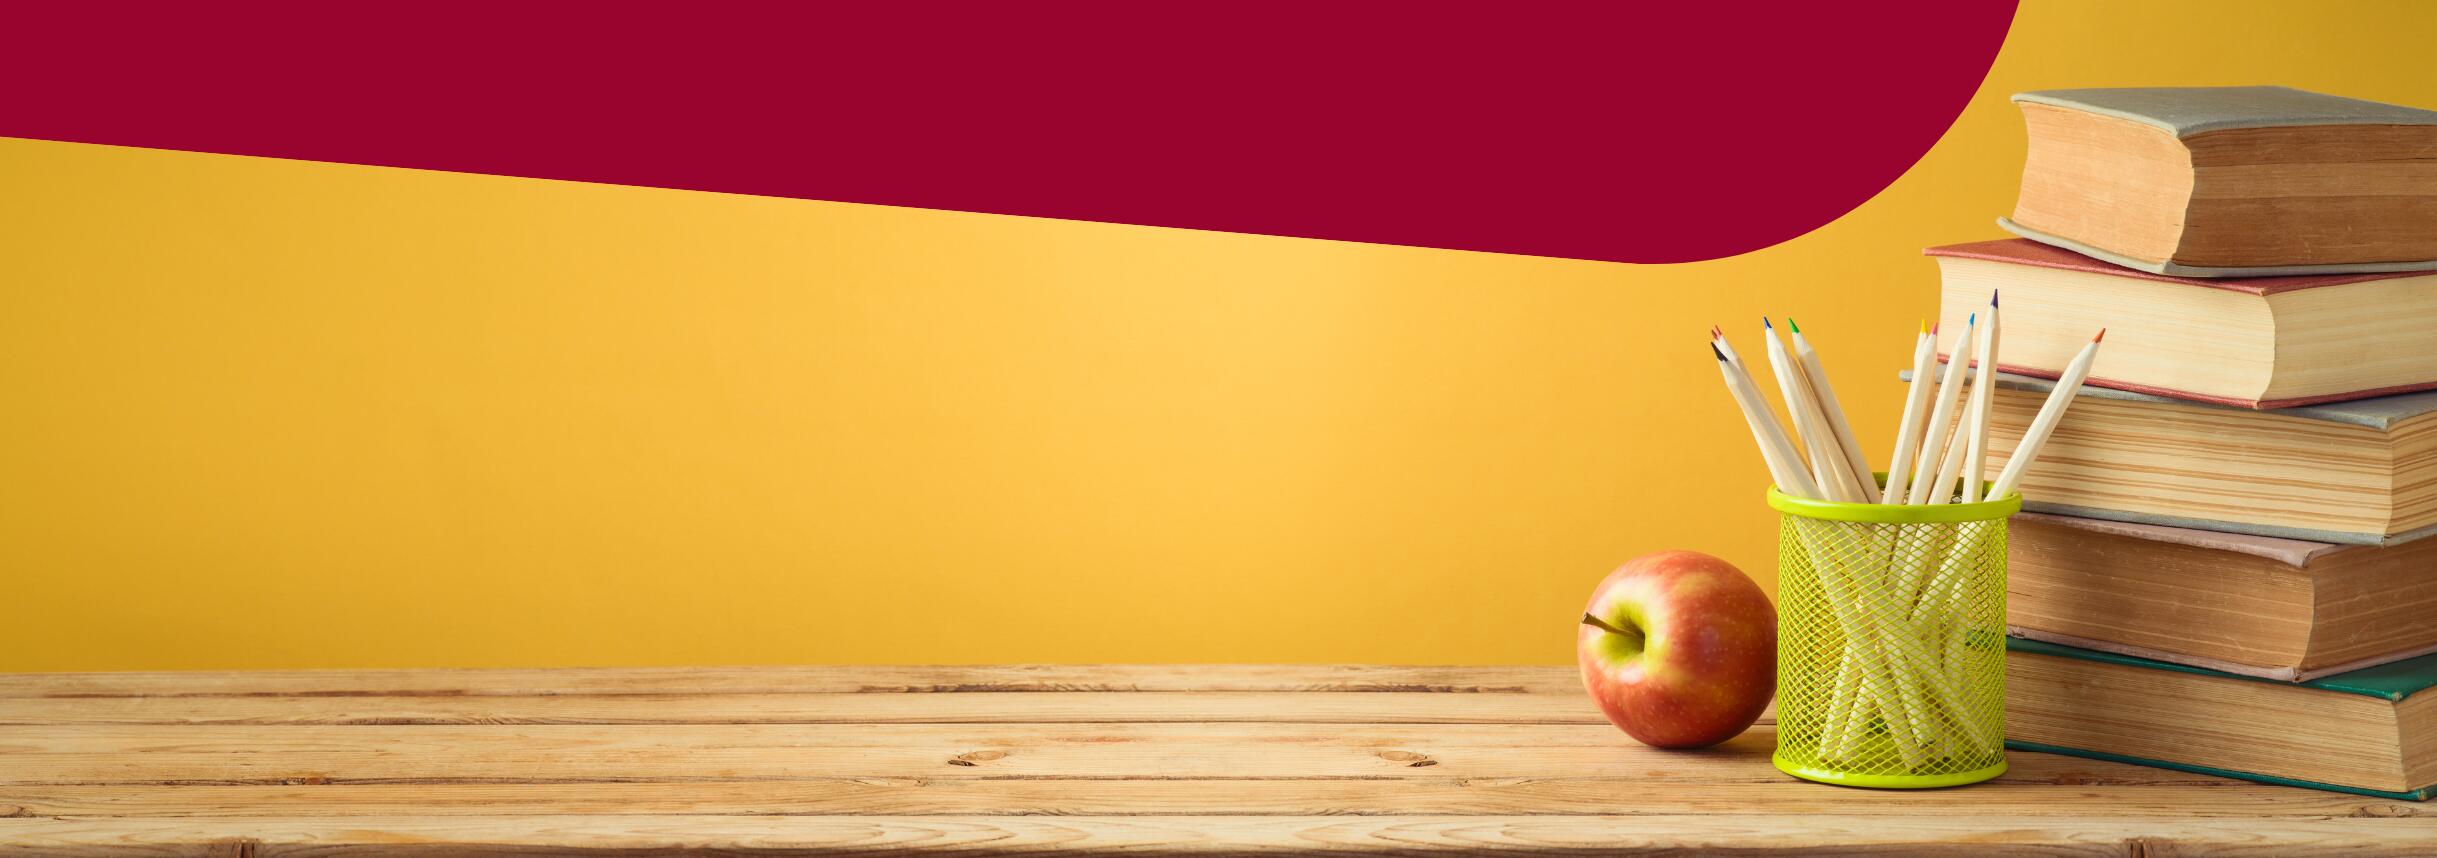 Yellow and Maroon background with school books, pencils and an apple on a wood table.